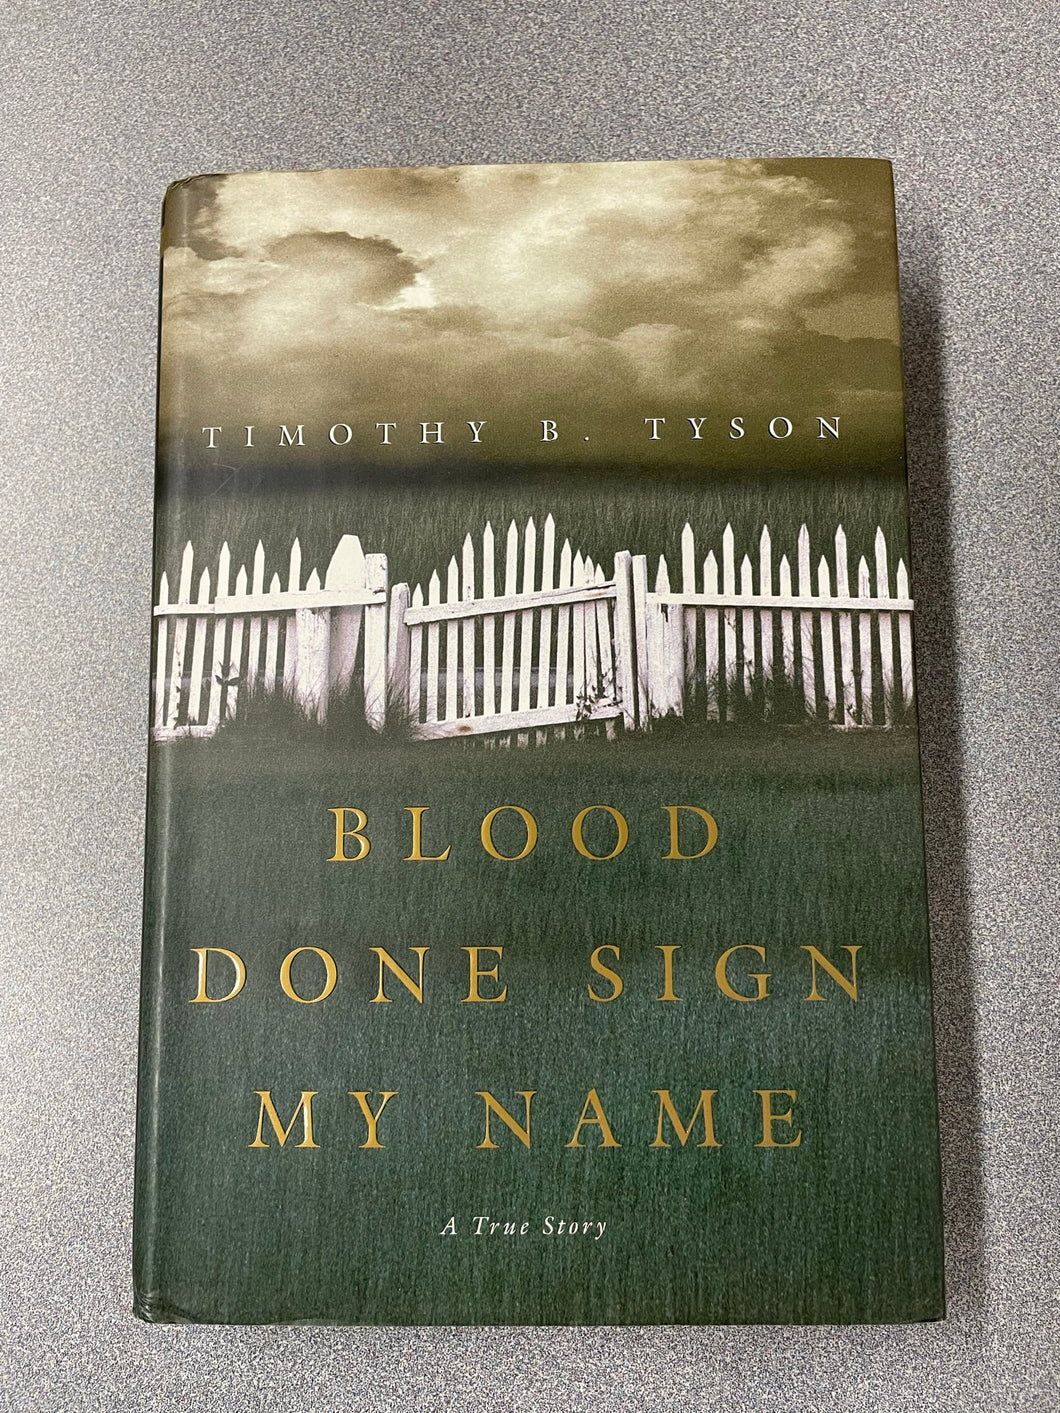 Blood Done Sign My Name, Tyson, Timothy B., [2004] TS 11/22